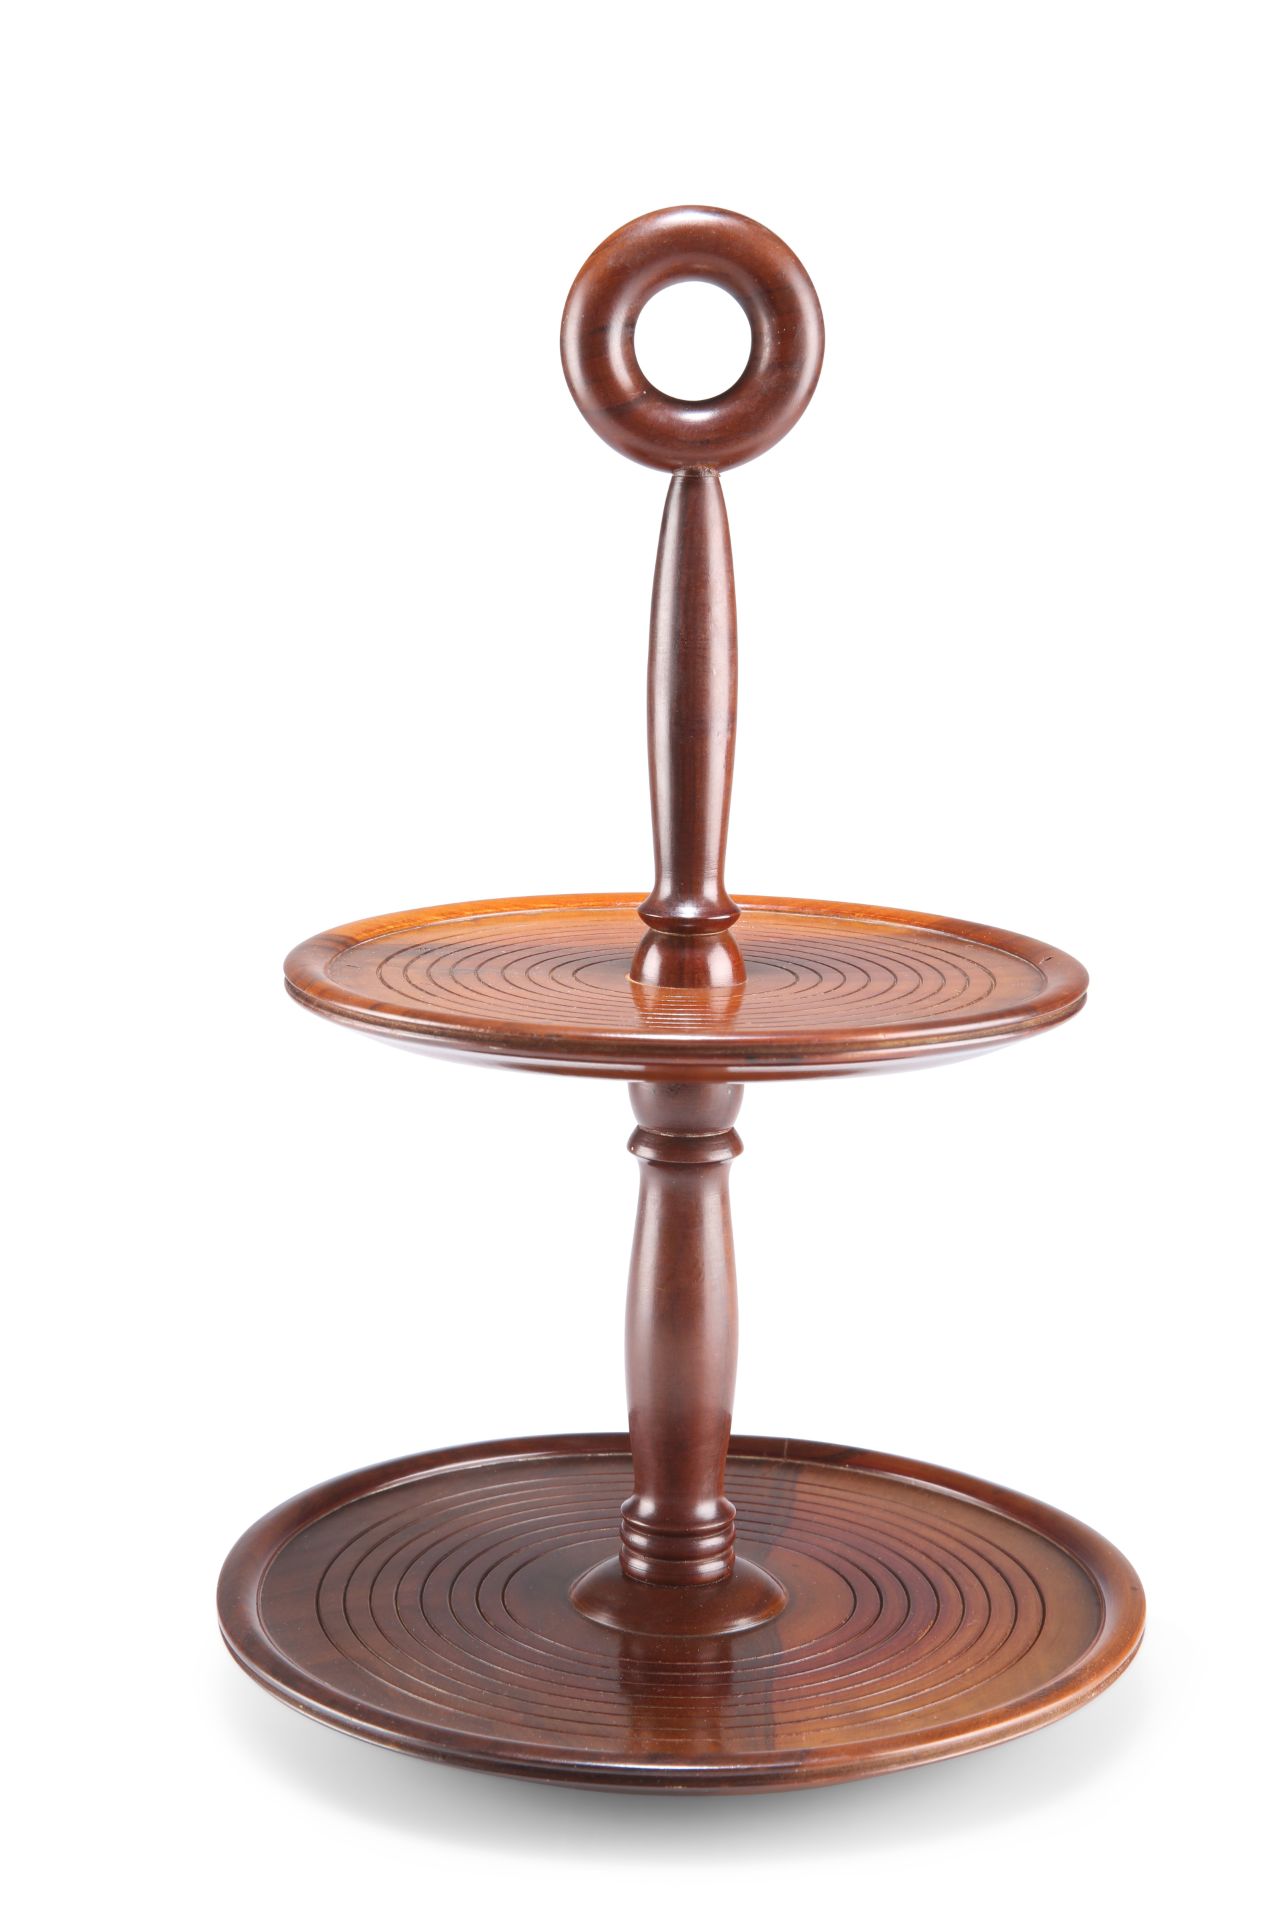 A LIGNUM VITAE TWO-TIER CAKESTAND, EARLY 20TH CENTURY